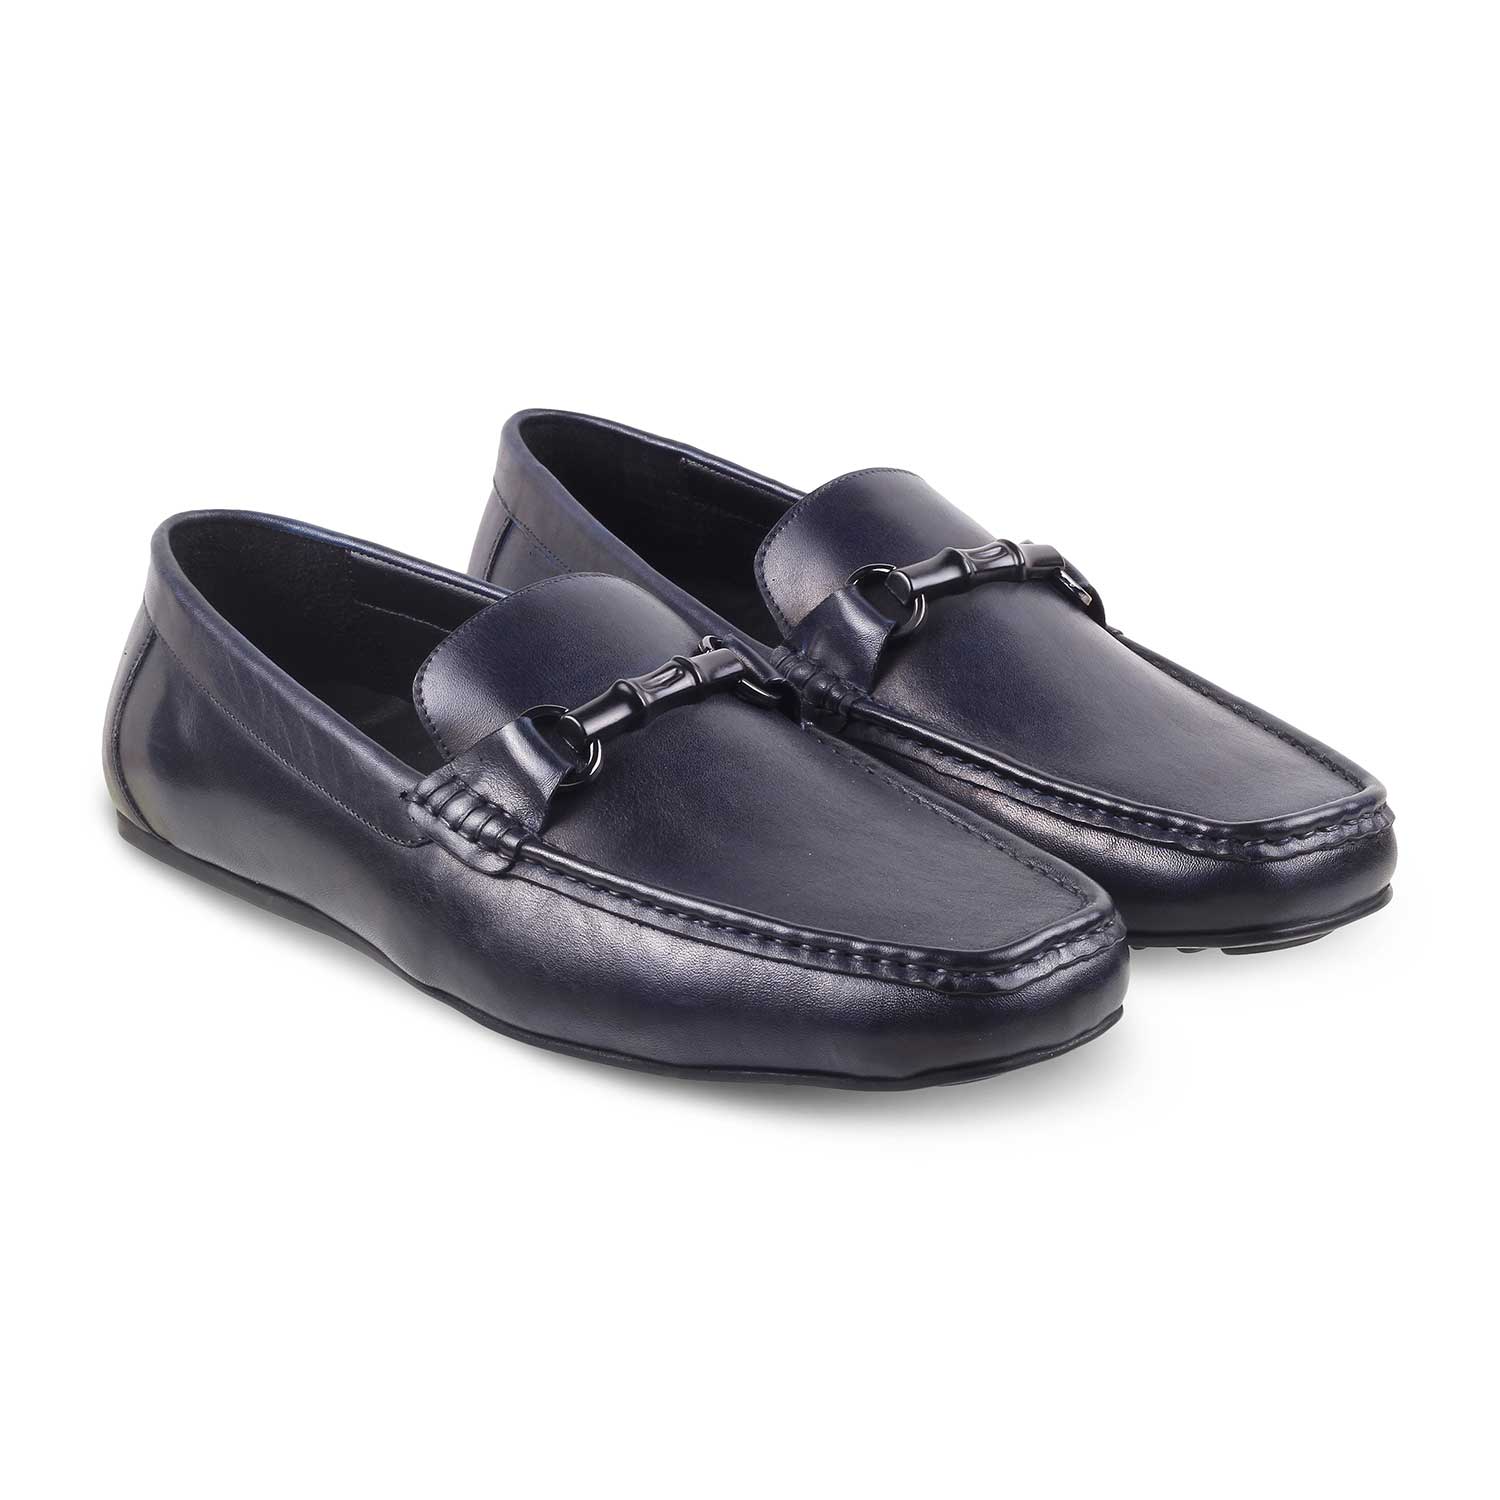 Tresmode-The Porter Navy Men's Leather Loafers Tresmode-Tresmode